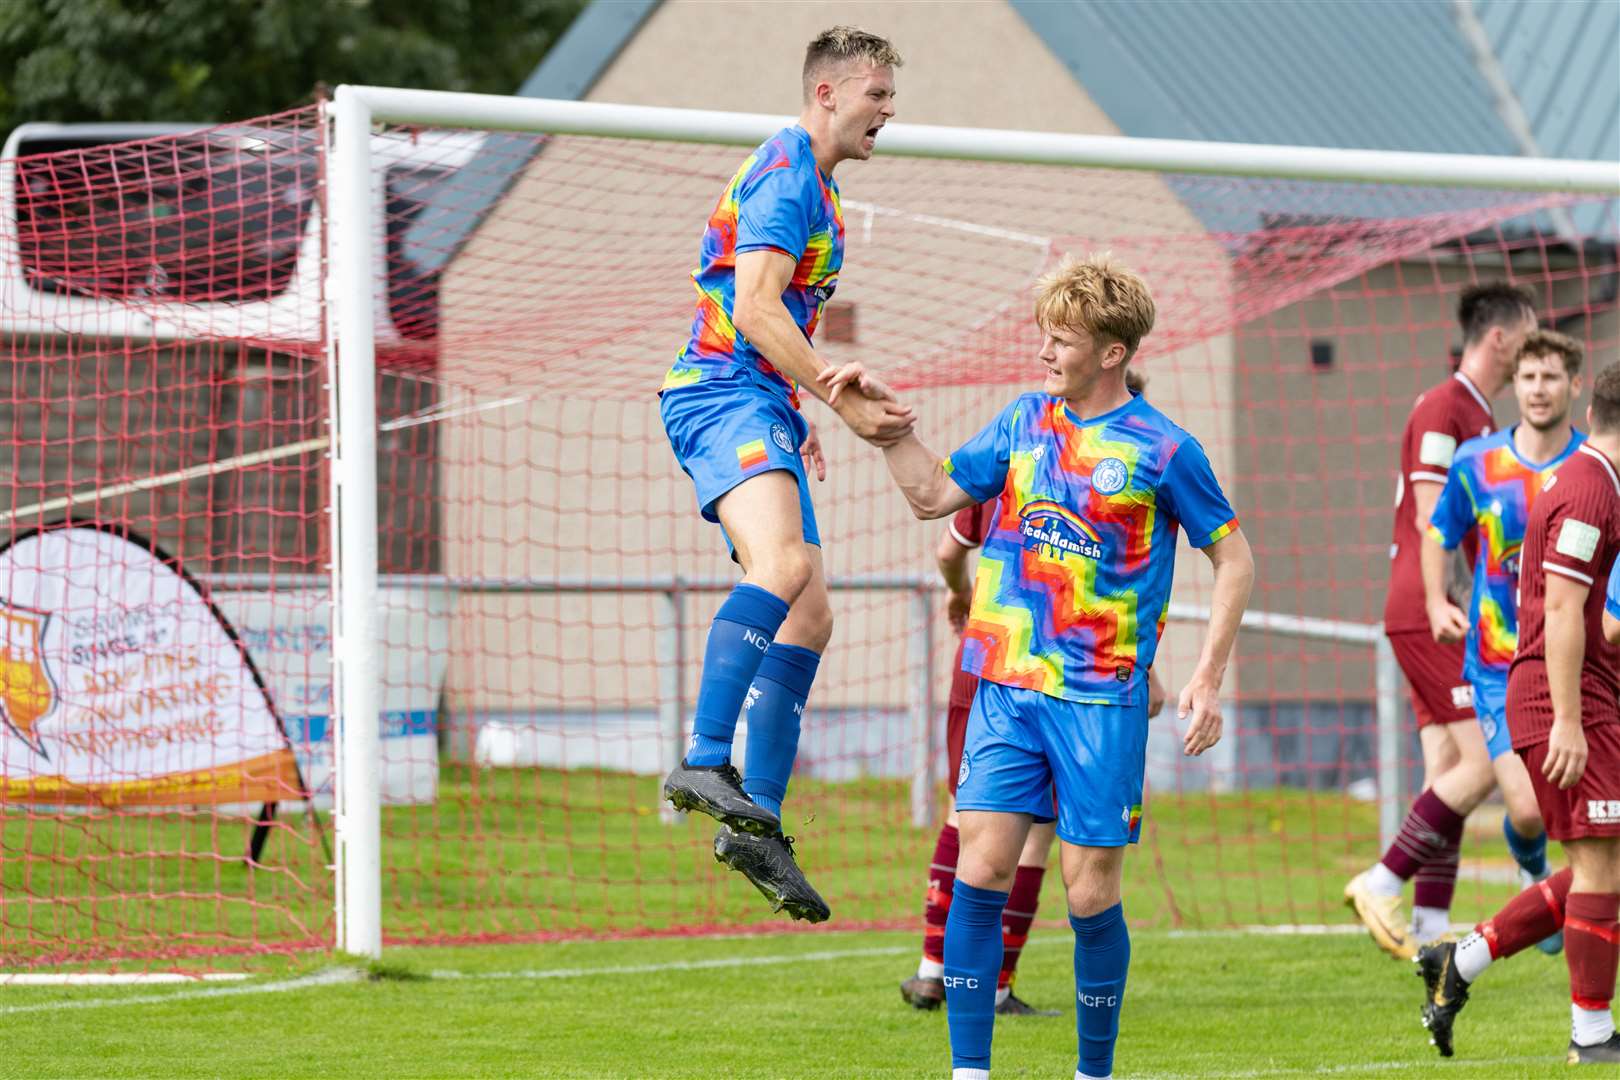 Nairn's Fraser Dingwall scoring the equaliser. ..Keith F.C. (3) v Nairn County F.C. (2), Highland Football League at Kynoch Park. ..Picture: Beth Taylor.